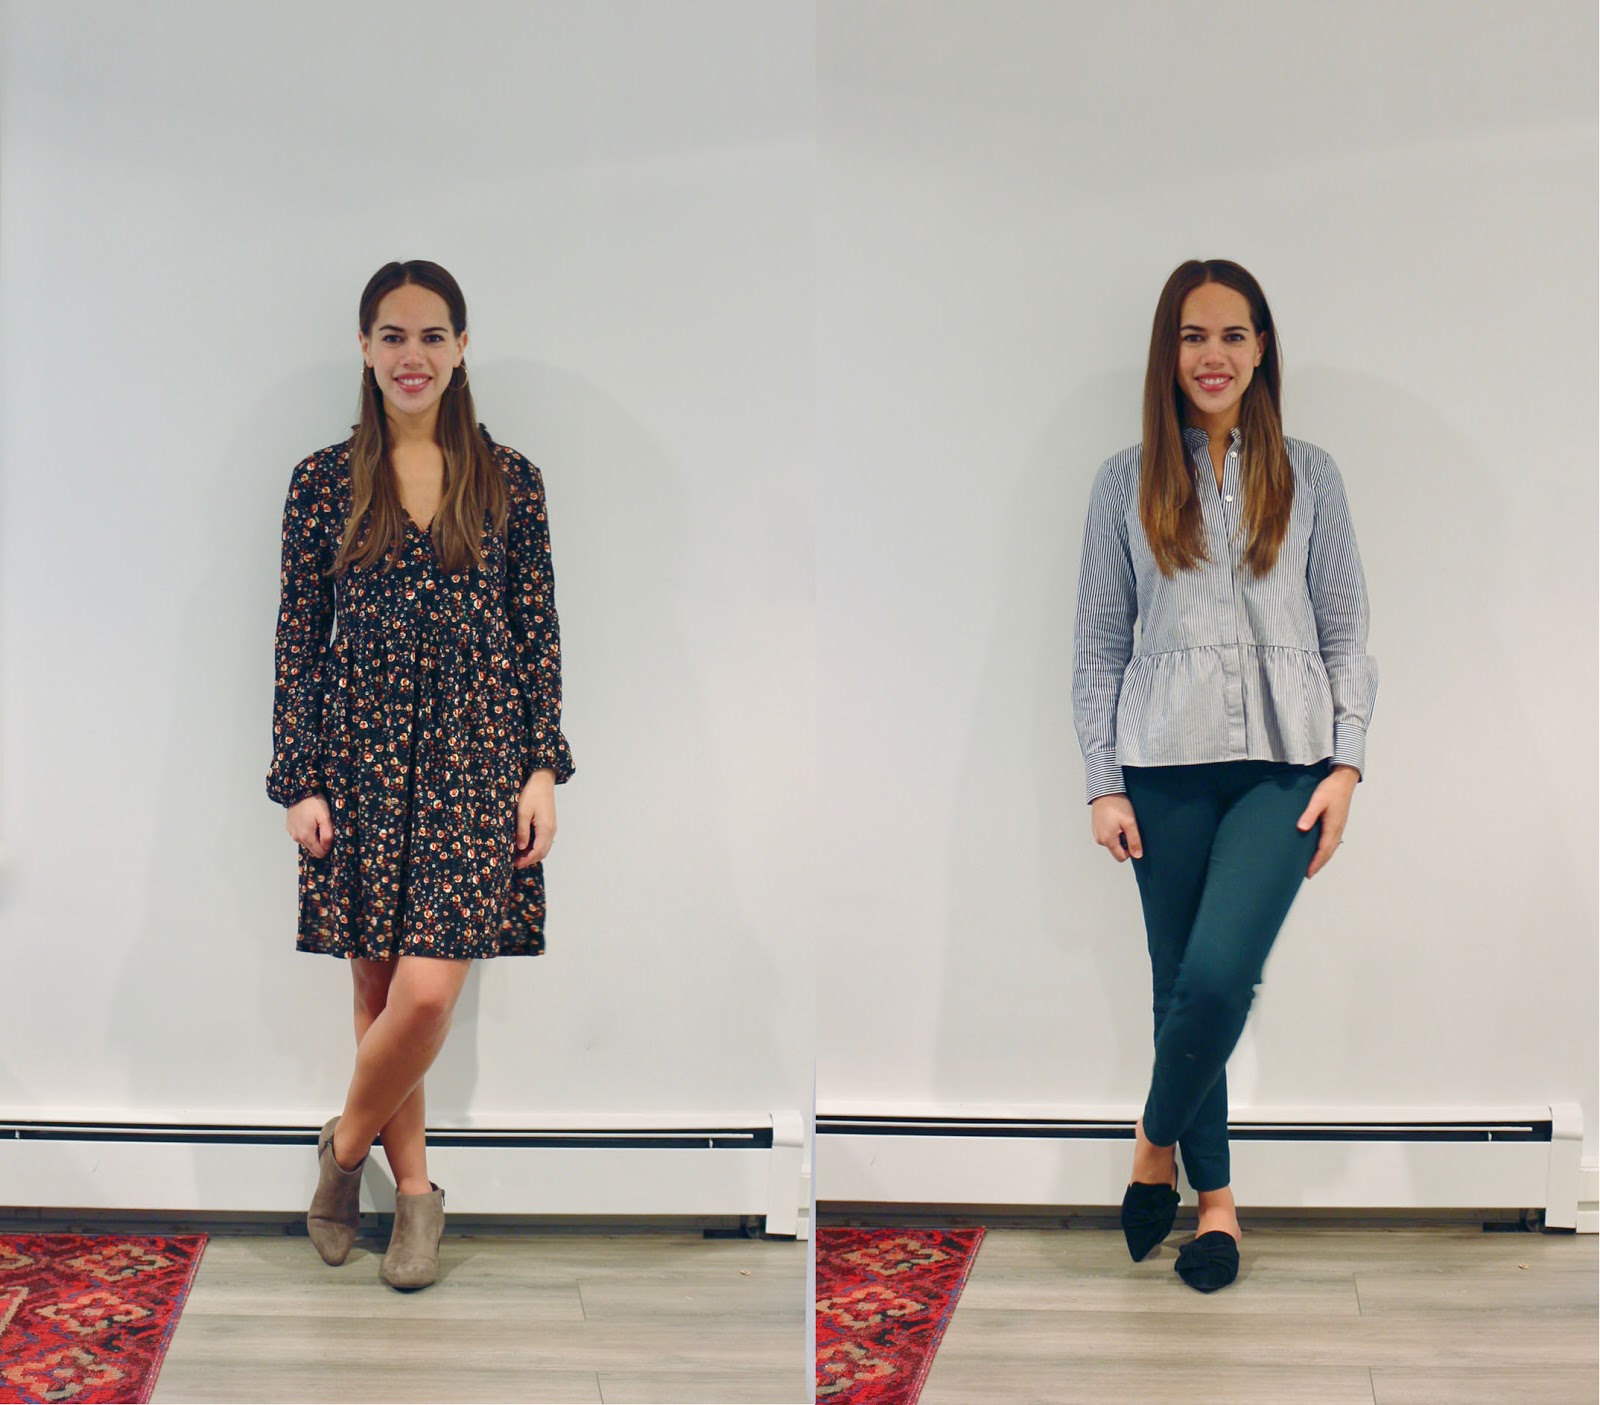 Jules in Flats - October Outfits (Business Casual Fall Workwear on a Budget)